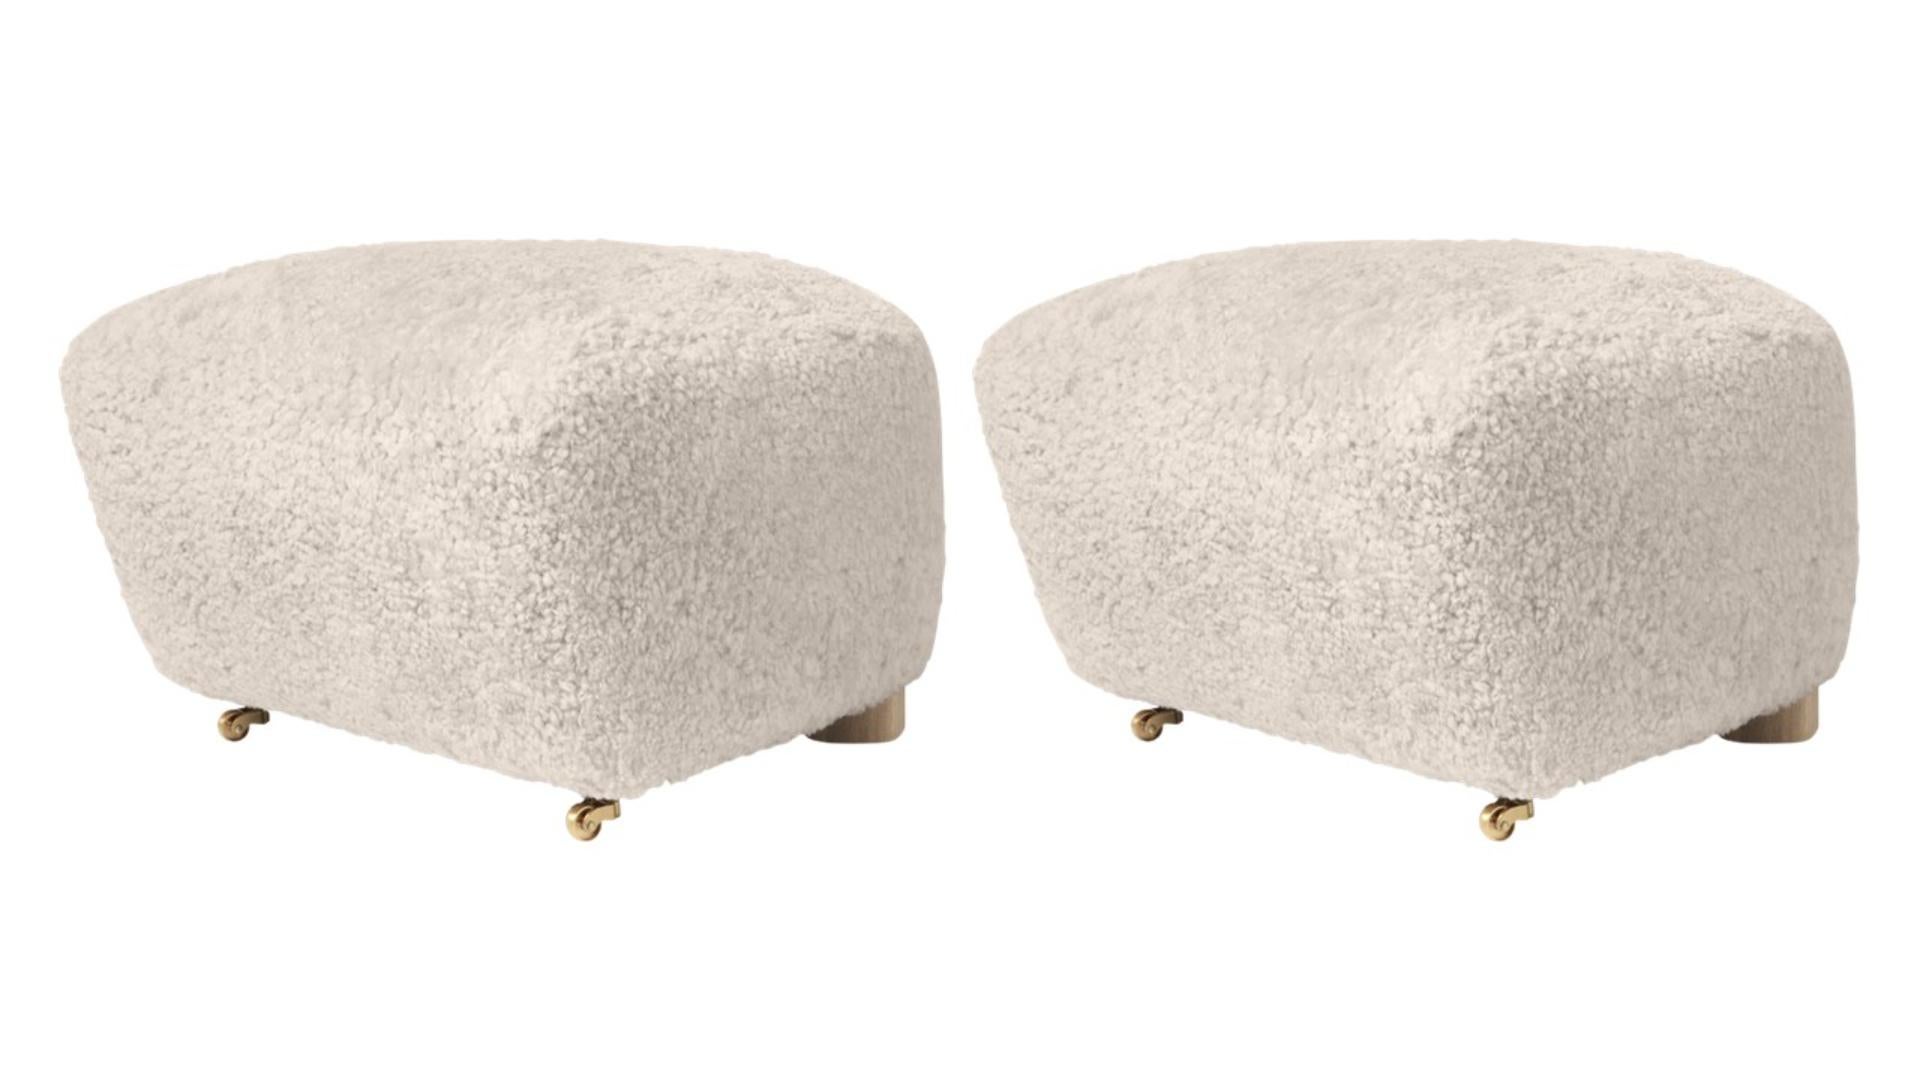 Set of 2 moonlight natural oak sheepskin the tired man footstools by Lassen
Dimensions: W 55 x D 53 x H 36 cm 
Materials: Sheepskin

Flemming Lassen designed the overstuffed easy chair, The Tired Man, for The Copenhagen Cabinetmakers’ Guild